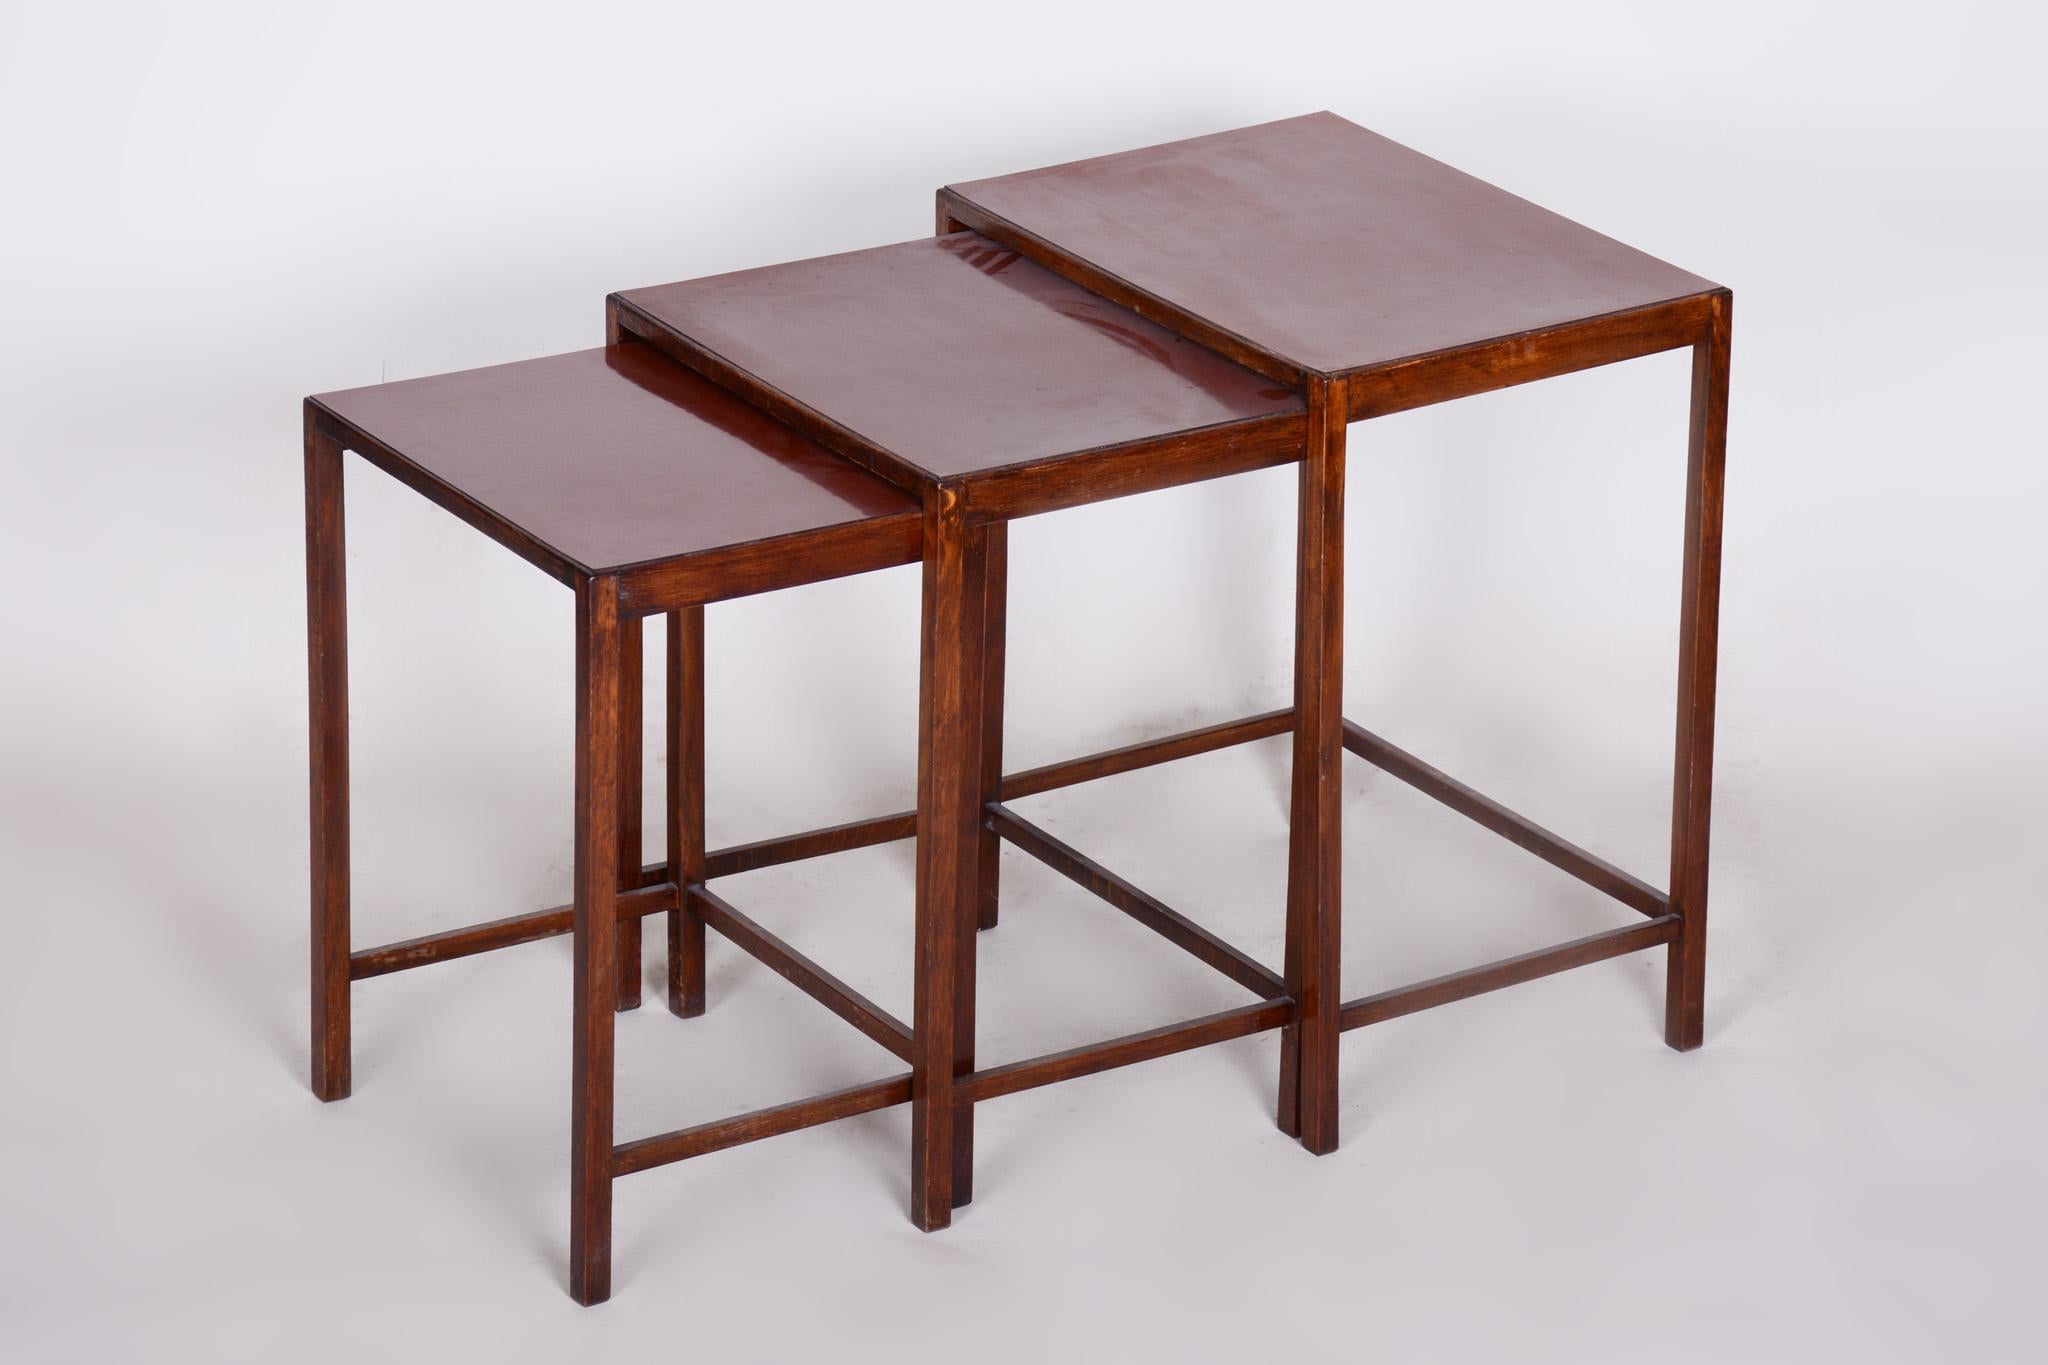 20th Century Original Condition Brown Nest Tables Made in the 1930s by Halabala, Czech